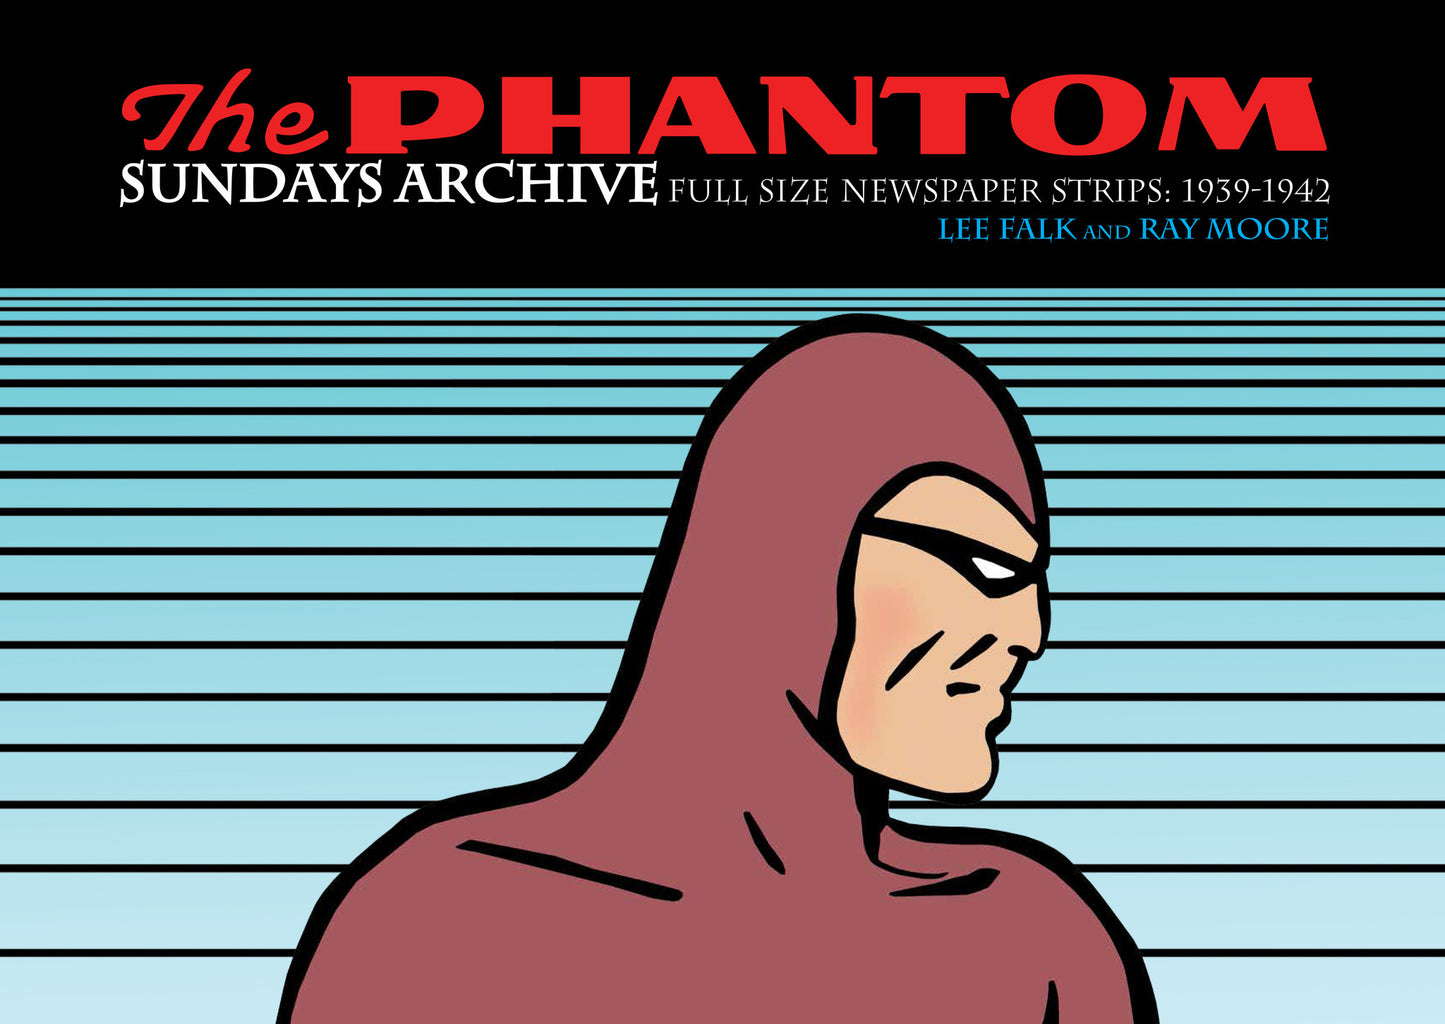 The Phantom Sunday Archive Special SDCC Limited Edition